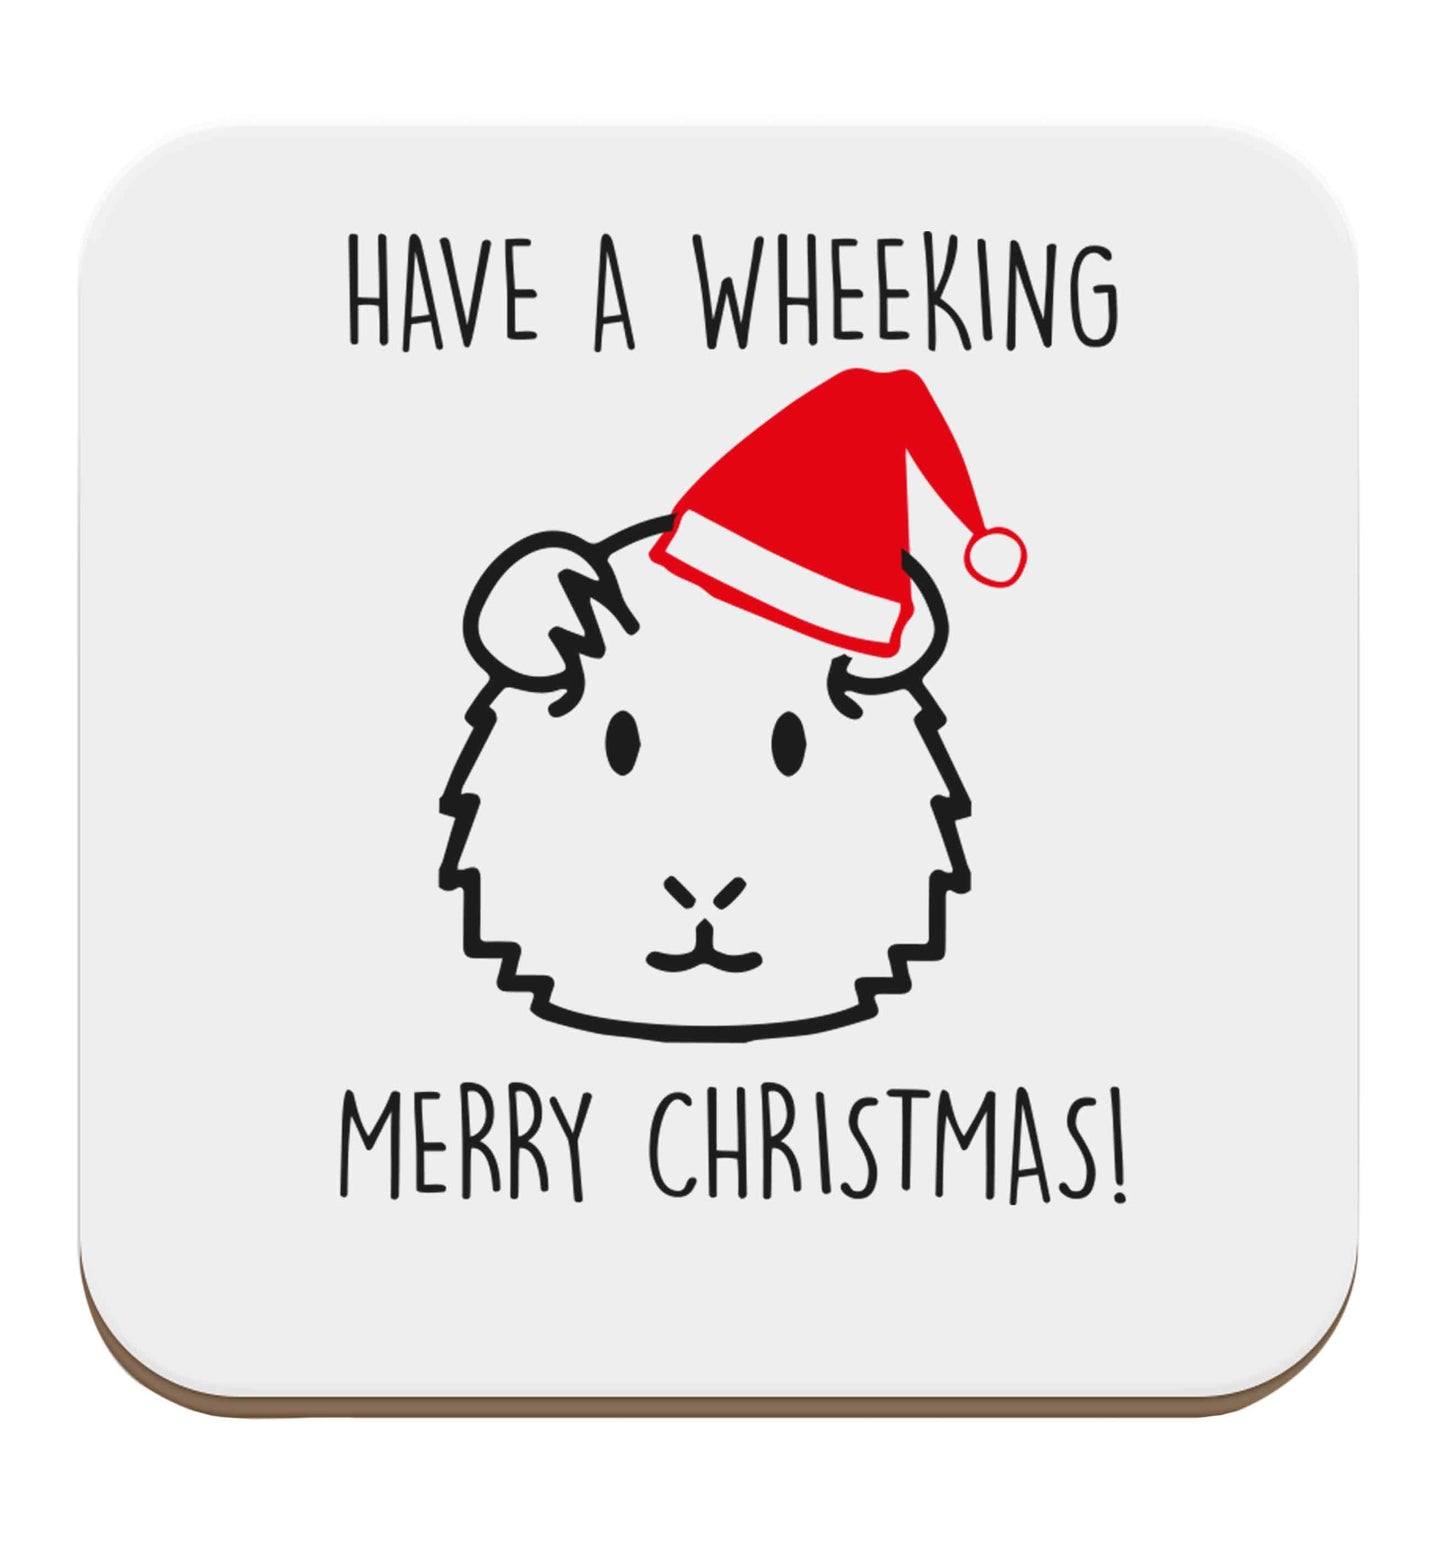 Have a wheeking merry Christmas set of four coasters